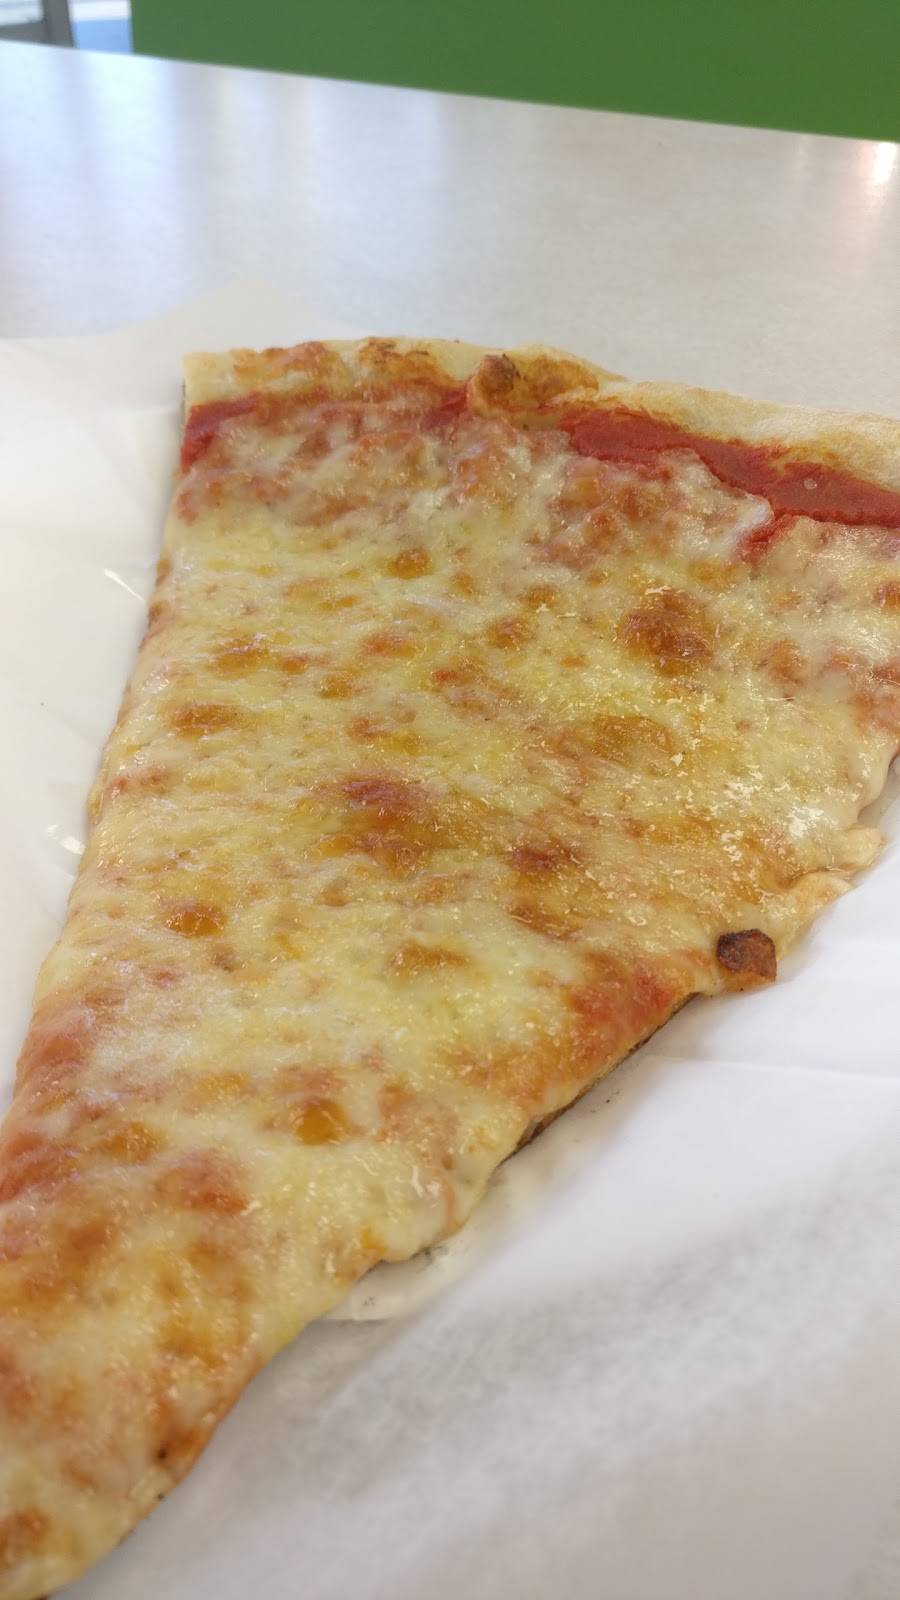 GJonis Pizza | bakery | 191 Linden St, Yonkers, NY 10701, USA | 9149696956 OR +1 914-969-6956